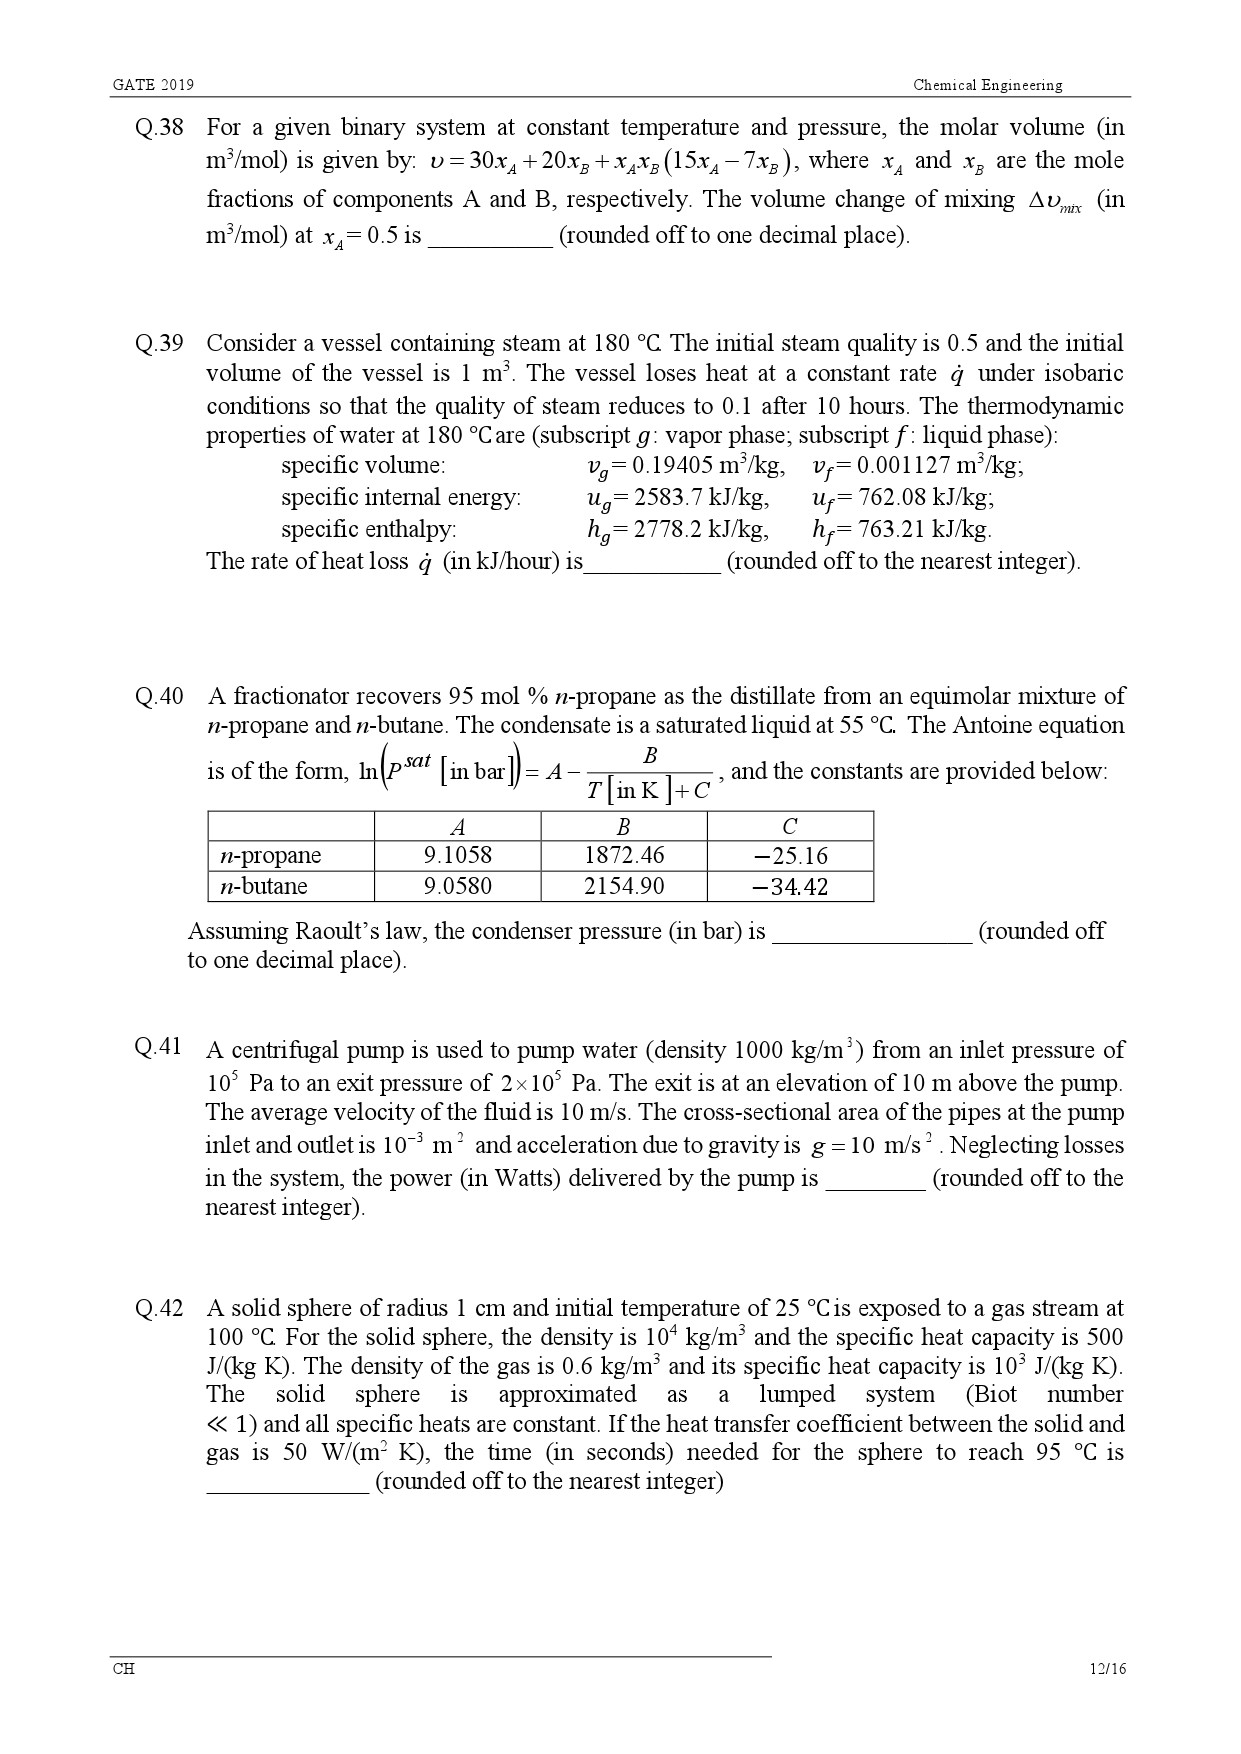 GATE Exam Question Paper 2019 Chemical Engineering 15